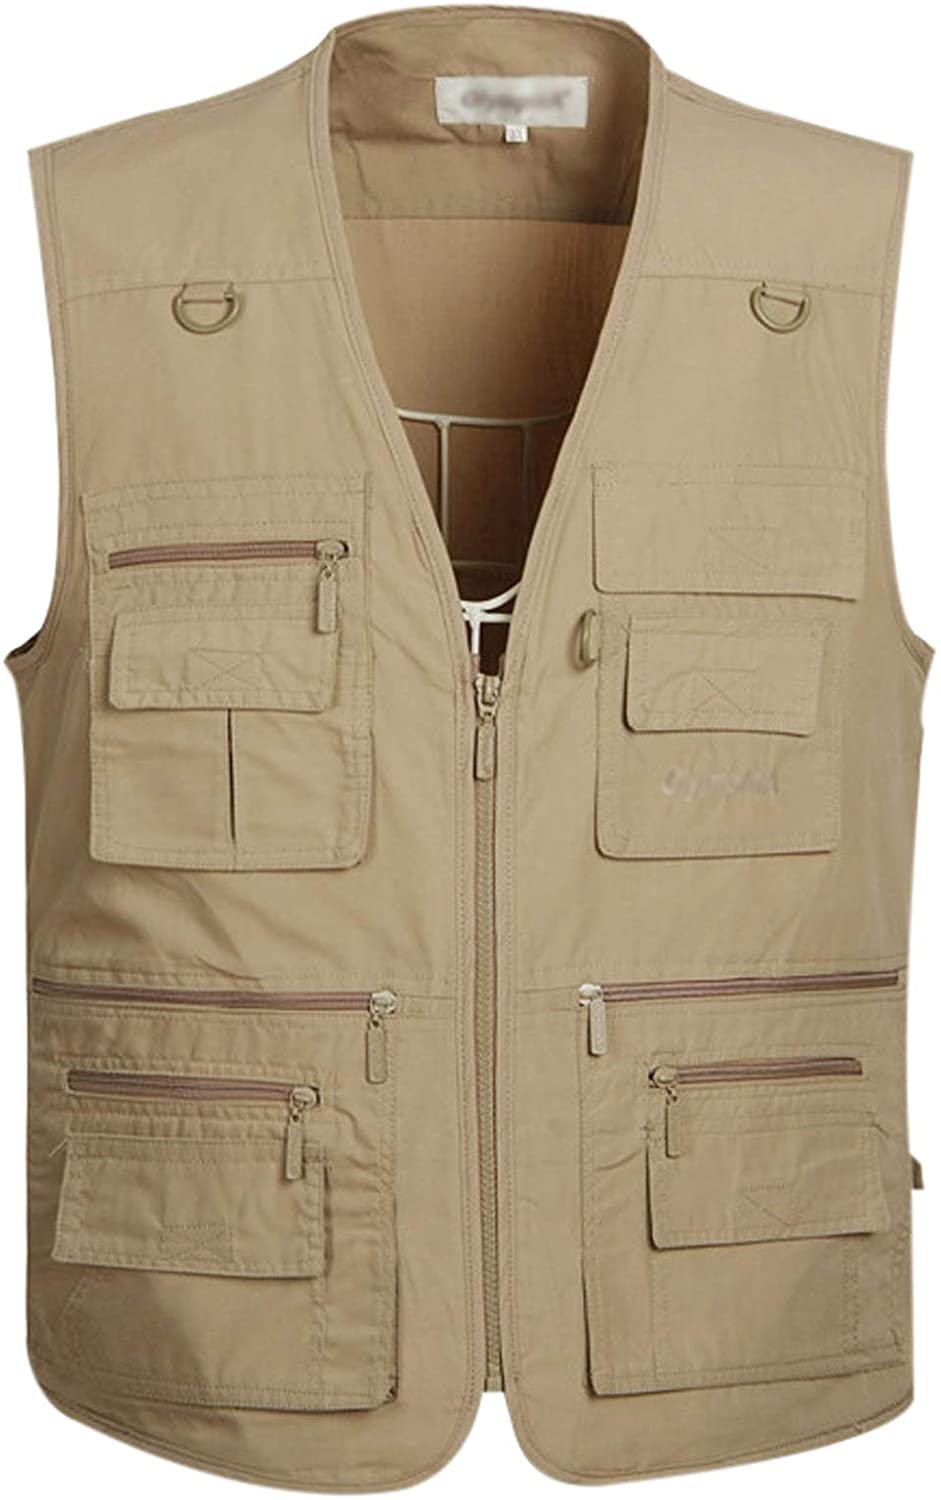 Gihuo Men's Fishing Vest Utility Shooting Safari Travel Vest with Pockets